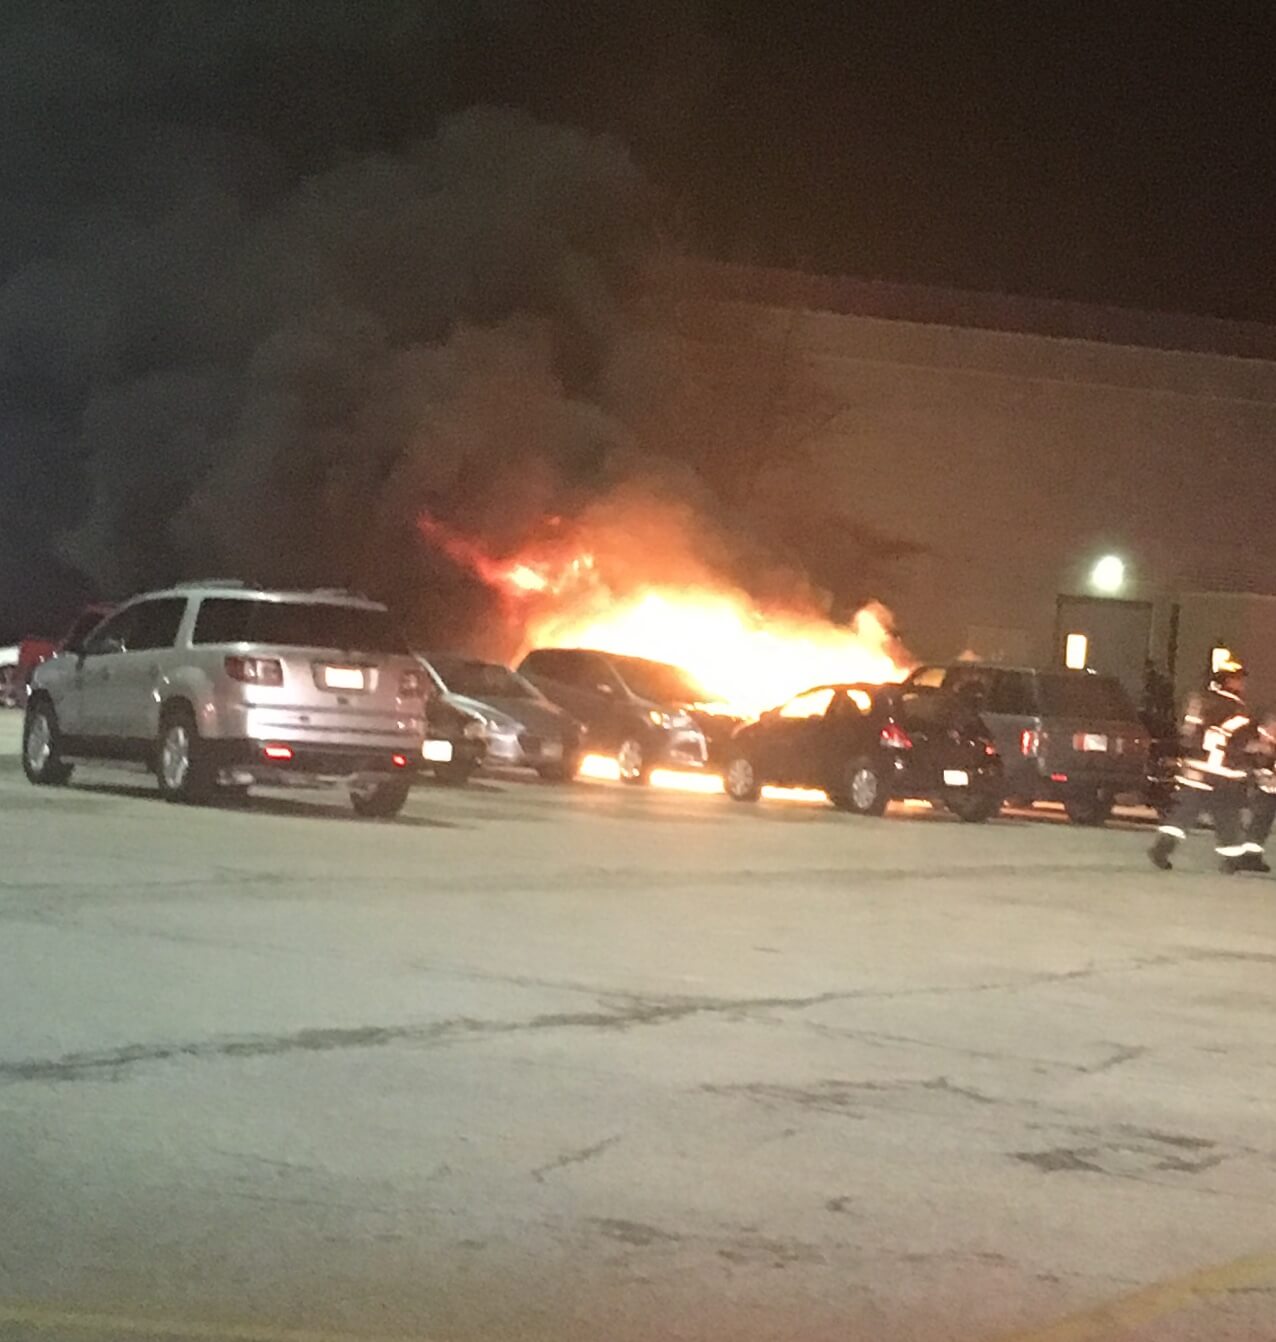 Four cars were damaged by fire in the Orland Park Mall on Thursday night Feb. 21, 2018. No one was injured. Photo courtesy of the Orland Fire Protection District